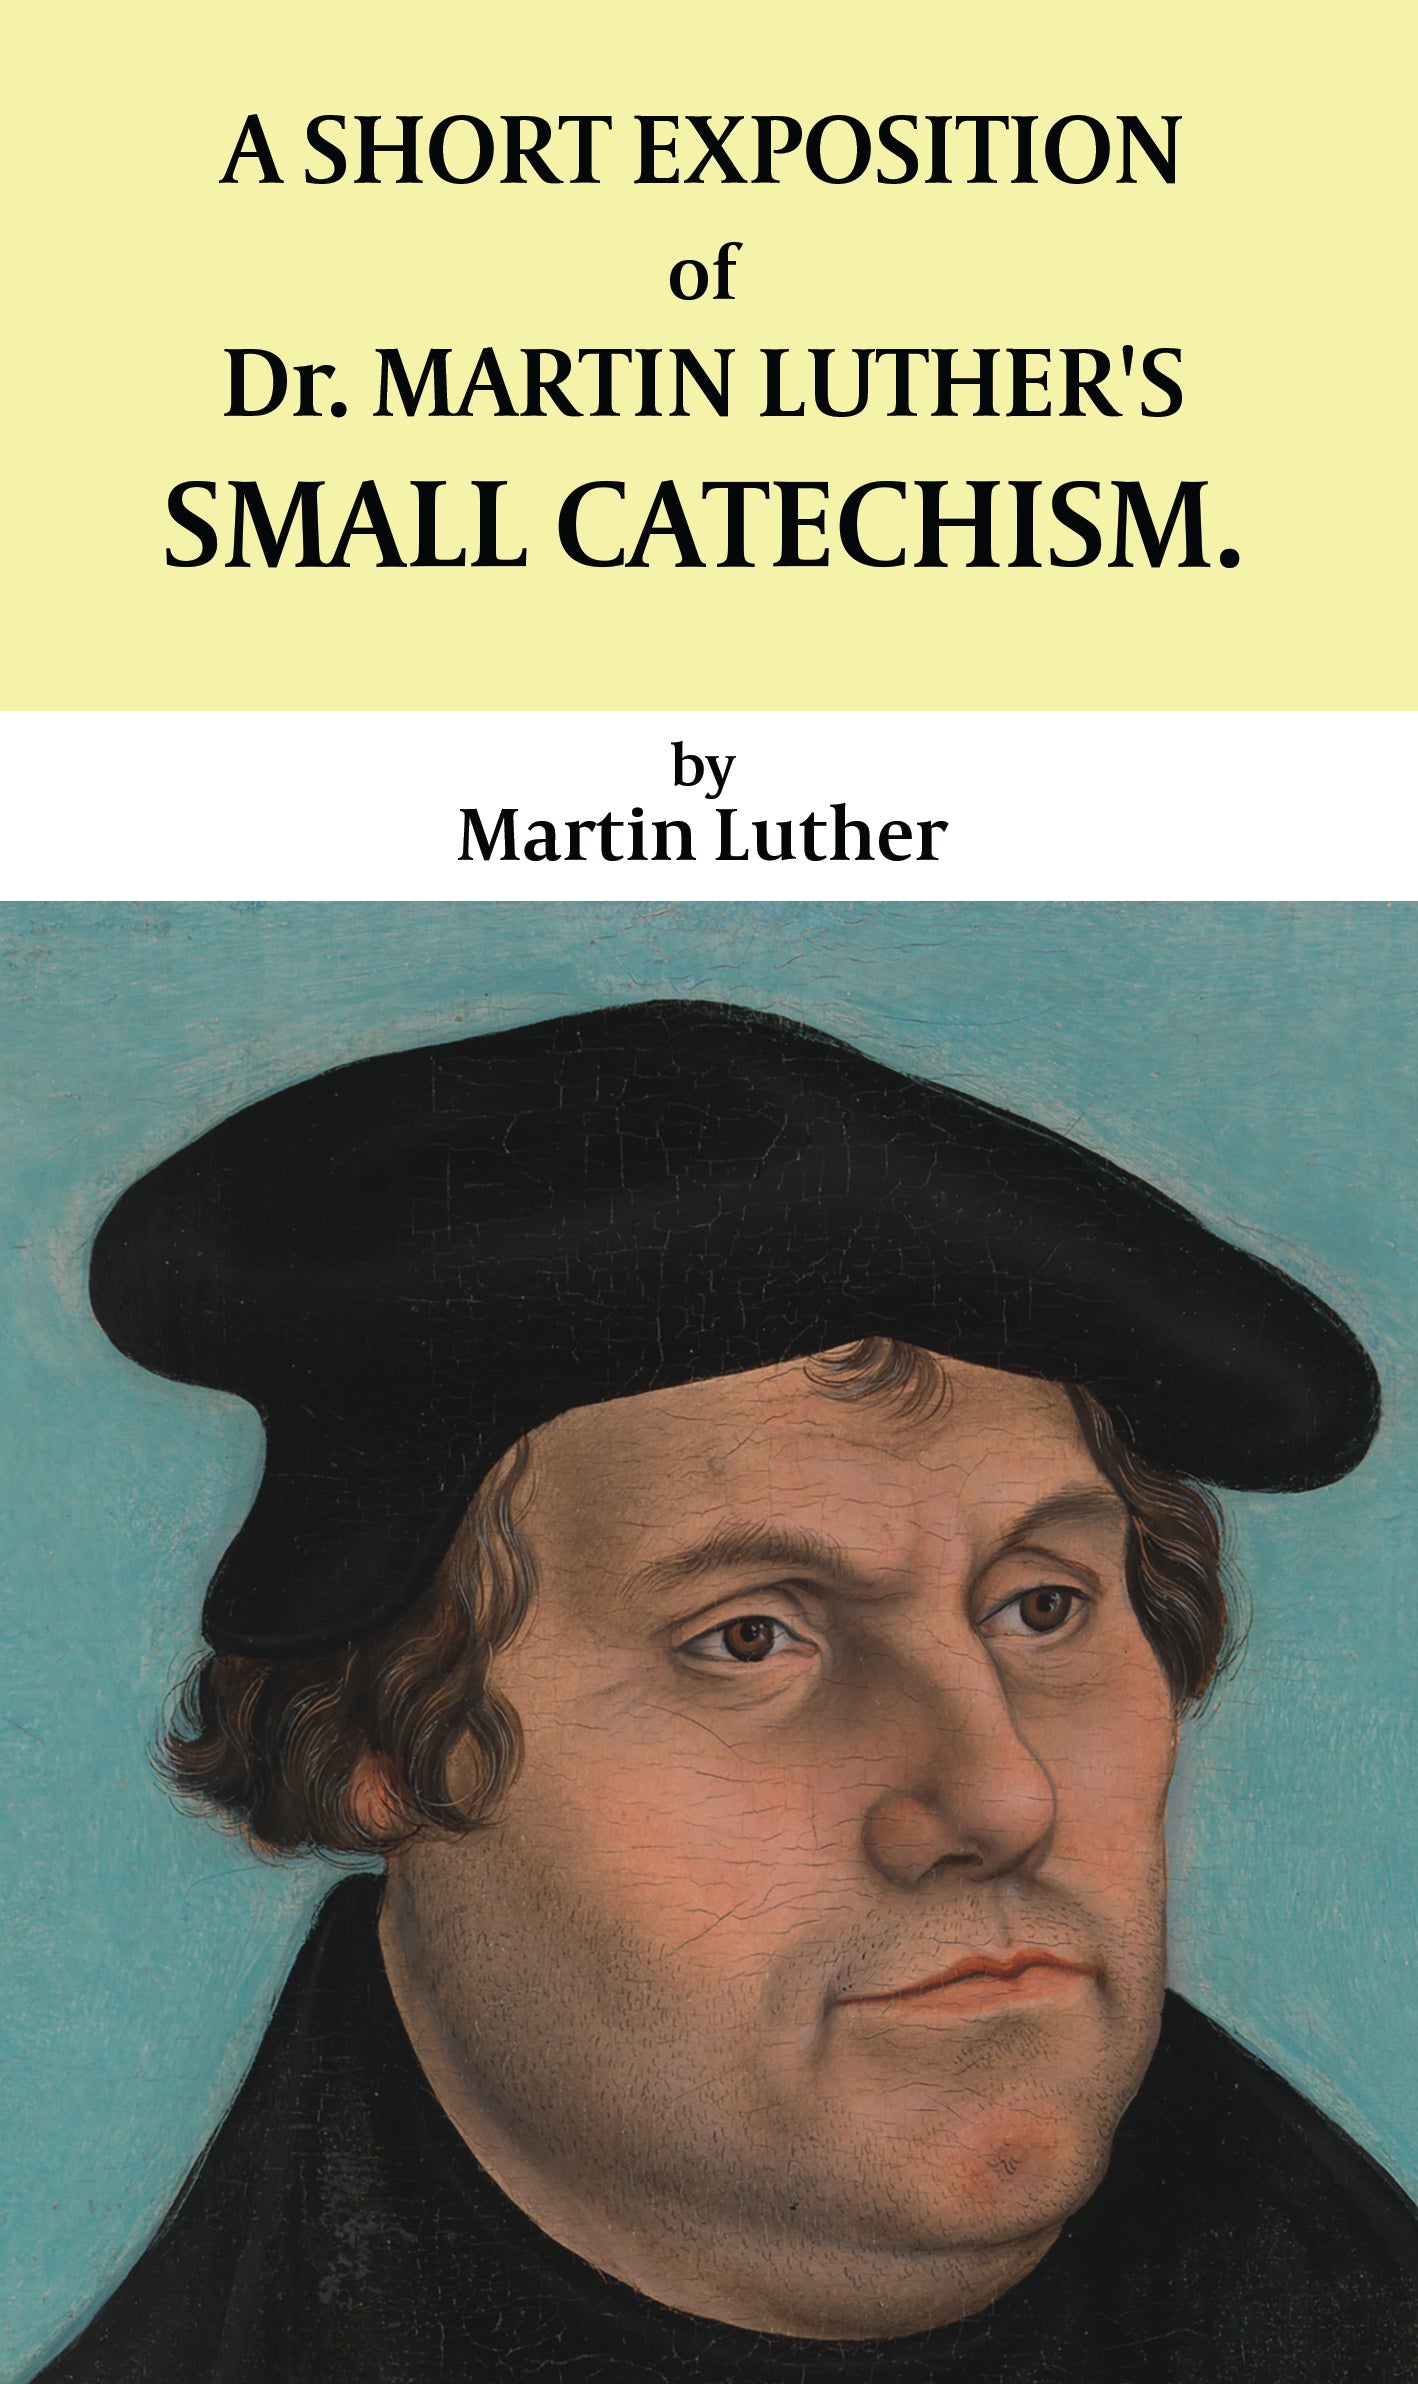 A Short Exposition of Dr. Martin Luther's Small Catechism